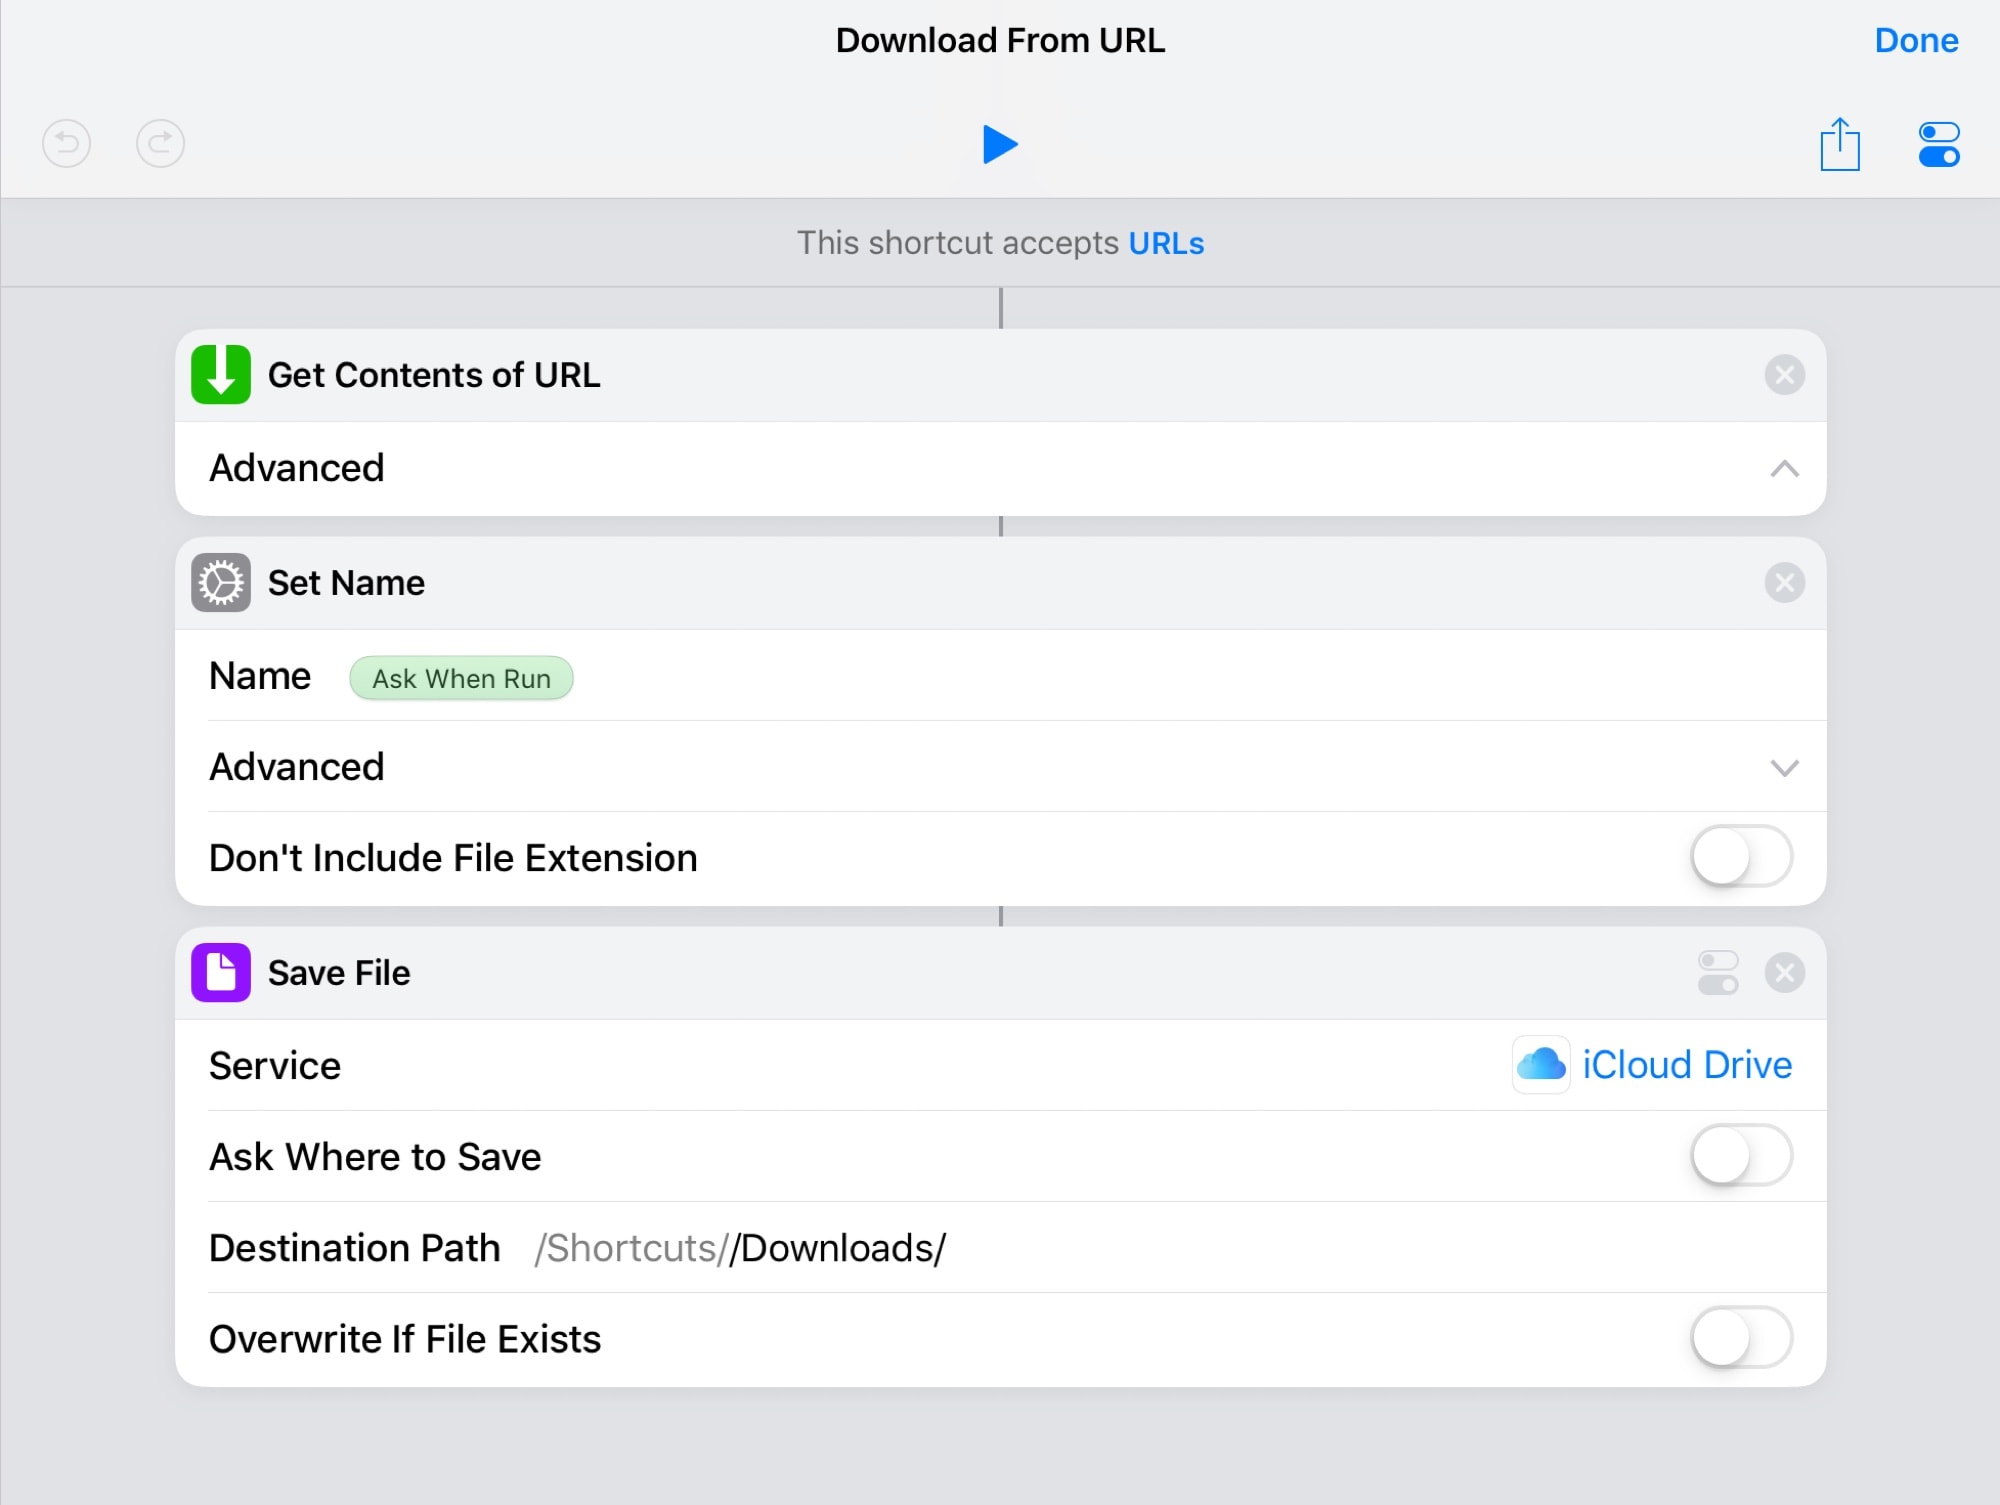 Tap the ‘Service’ to choose between Dropbox and iCloud Drive. 